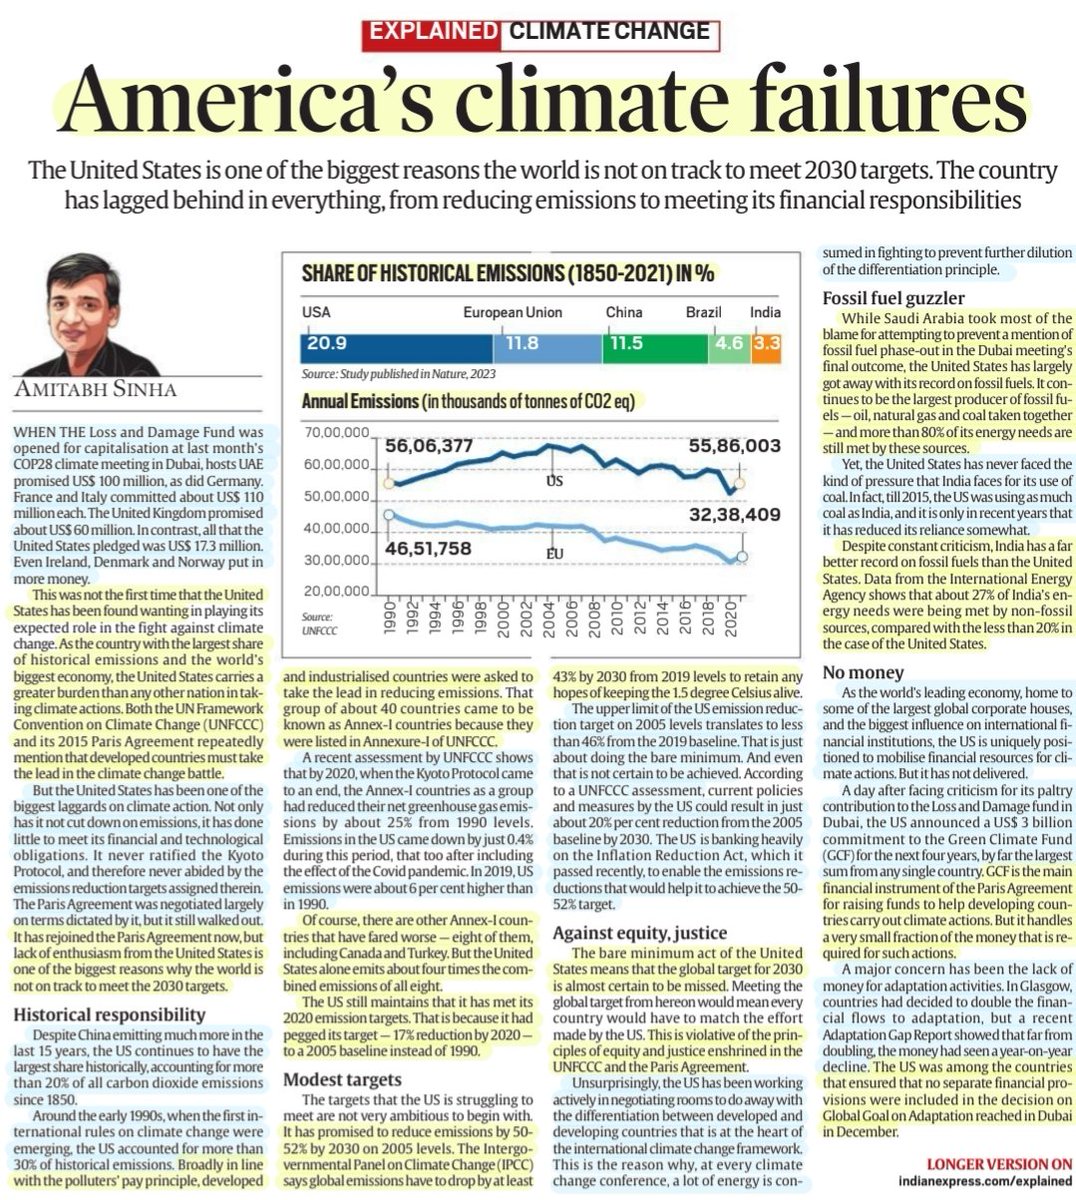 'America's Climate Failures'

:Explained by Sh Amitabh Sinha

#UnitedStates #Historical #emissions #Polluter 📈 #HistoricalResponsibility 
#ClimateChange 
#ParisAgreement #UNFCCC #IPCC #KyotoProtocol #GlobalWarming
#Equity #Justice #CBDR
#GCF #LossAndDamageFund

#UPSC

Source: IE